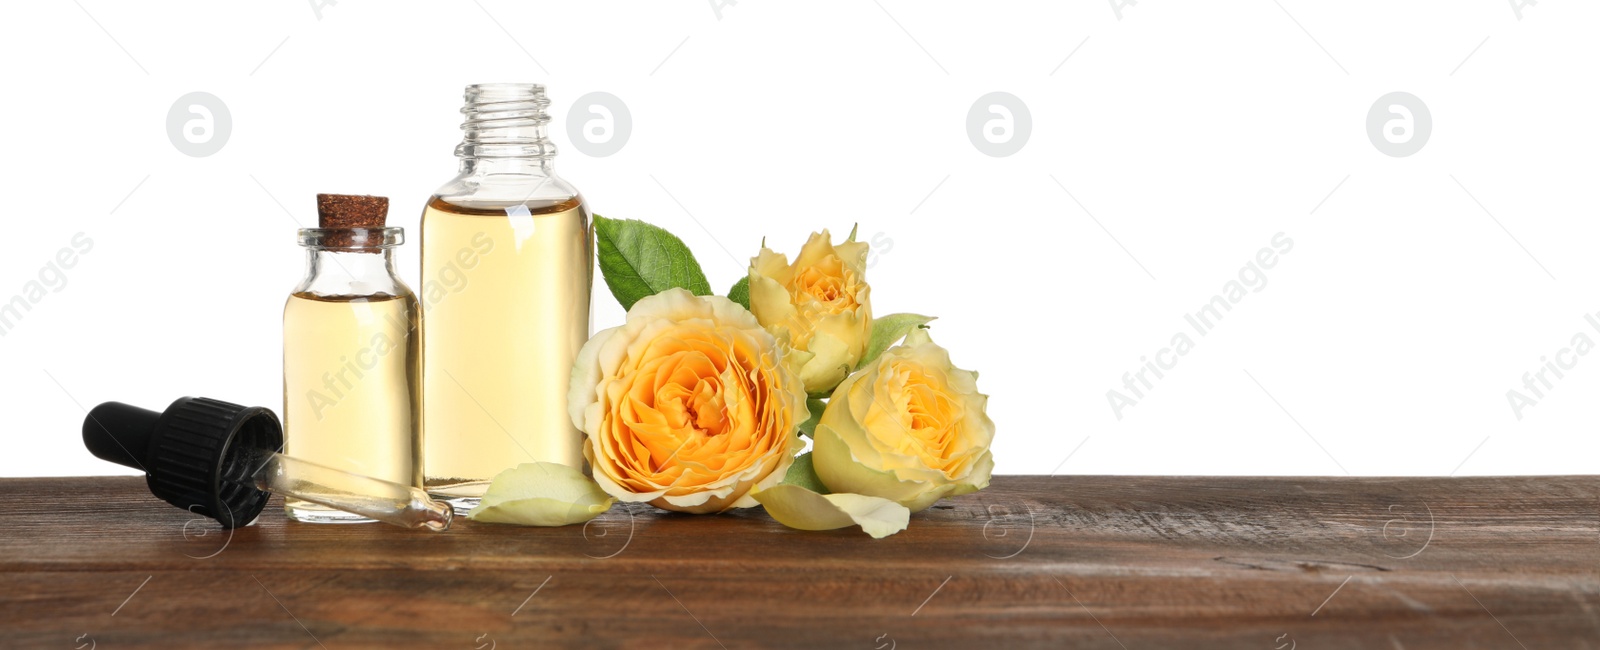 Photo of Bottles of rose essential oil and flowers on wooden table, white background